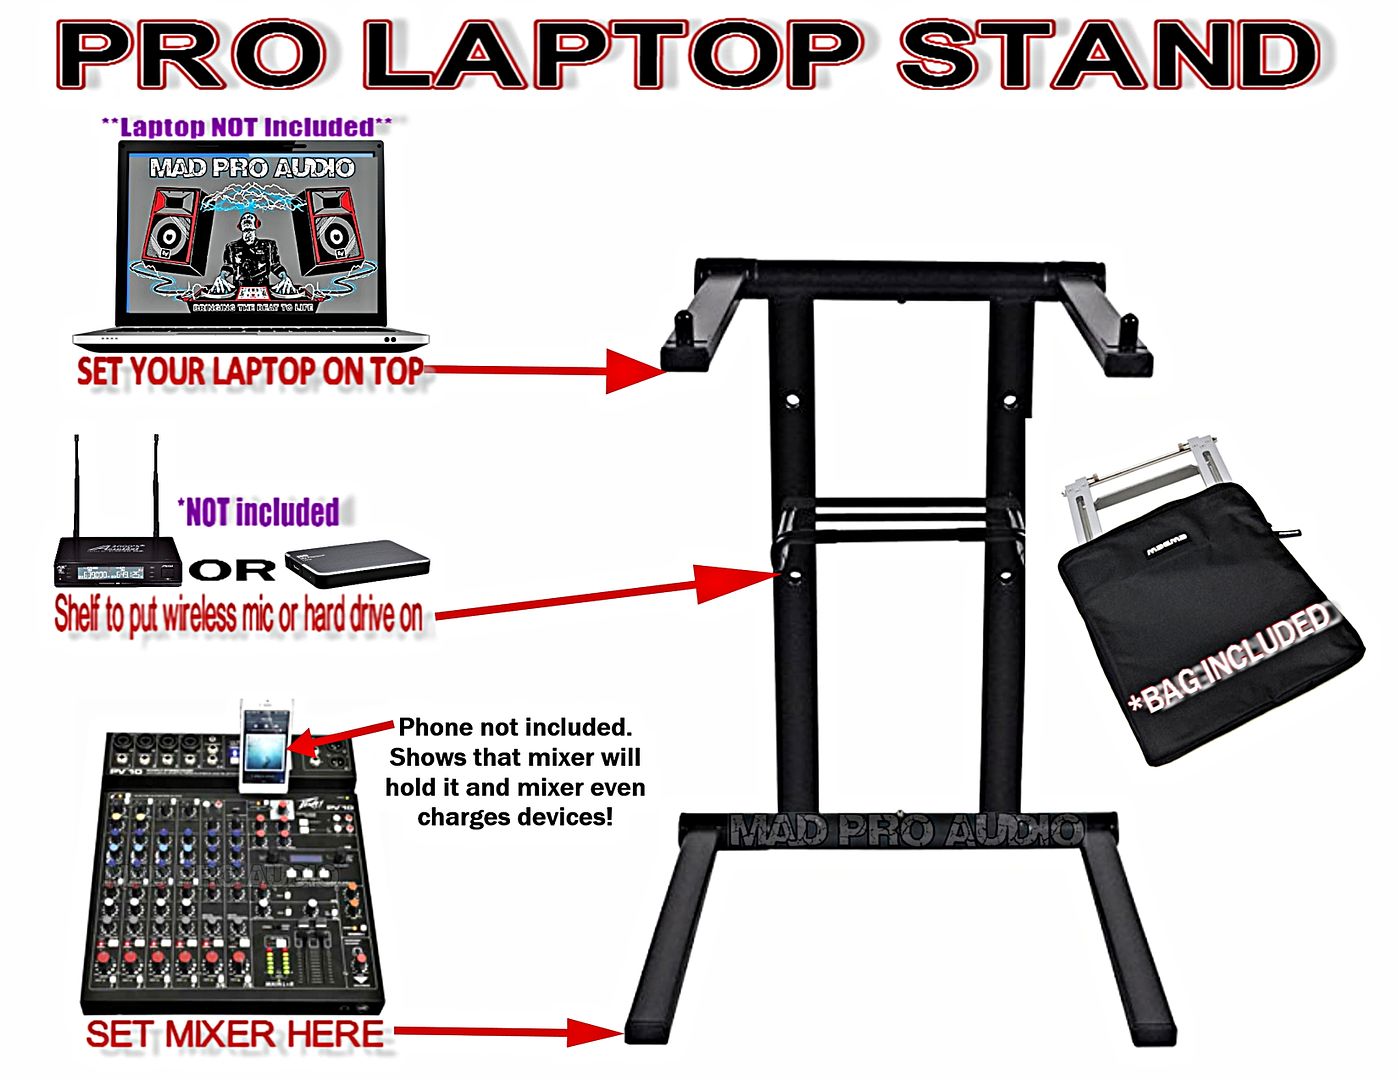 dj laptop stand by Madproaudio